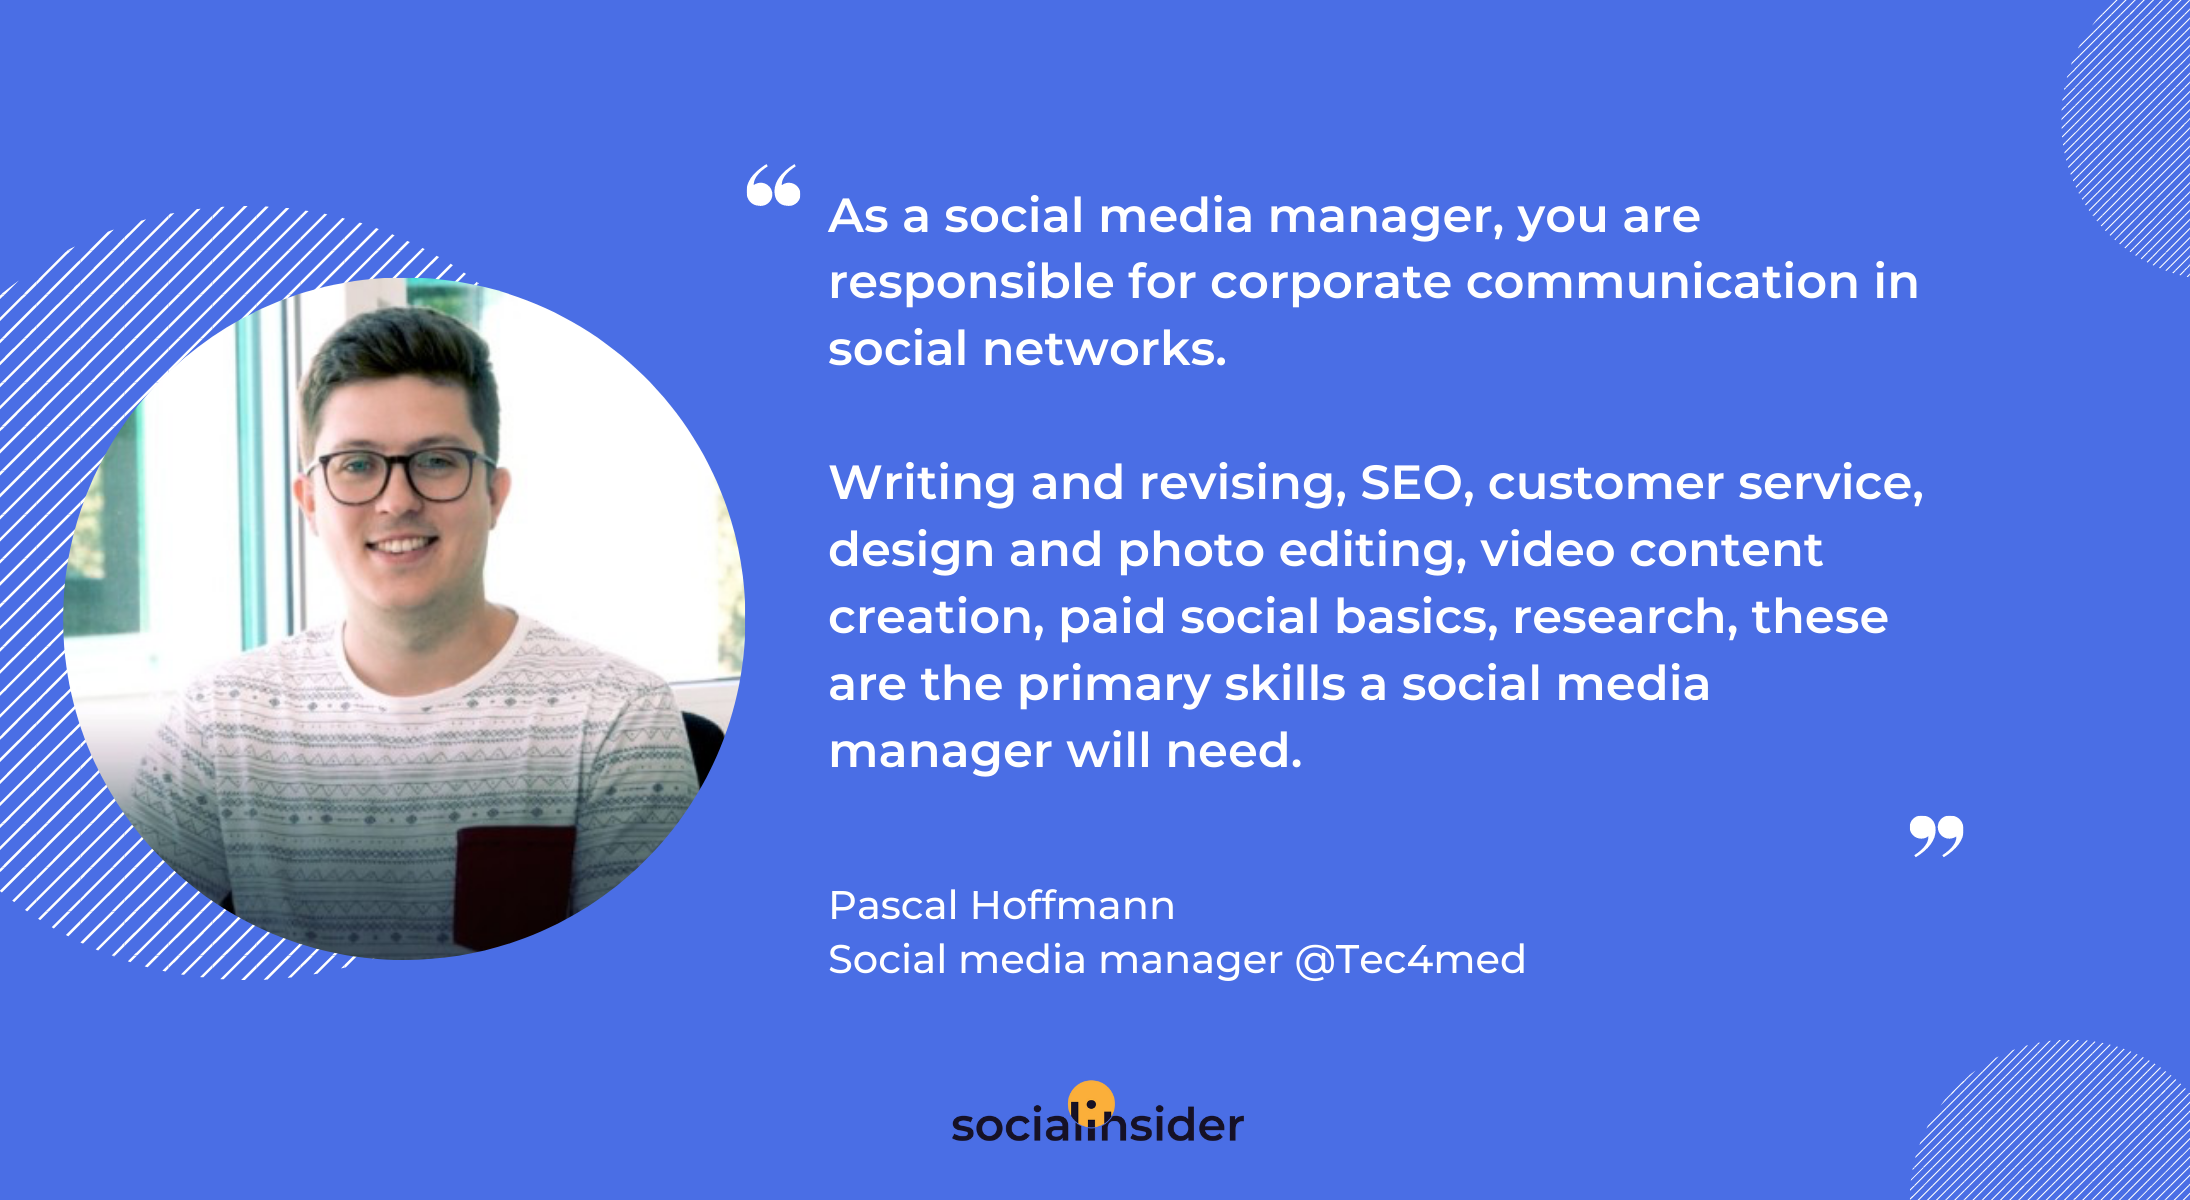 quote of pascal hoffman social media manager at tec4med